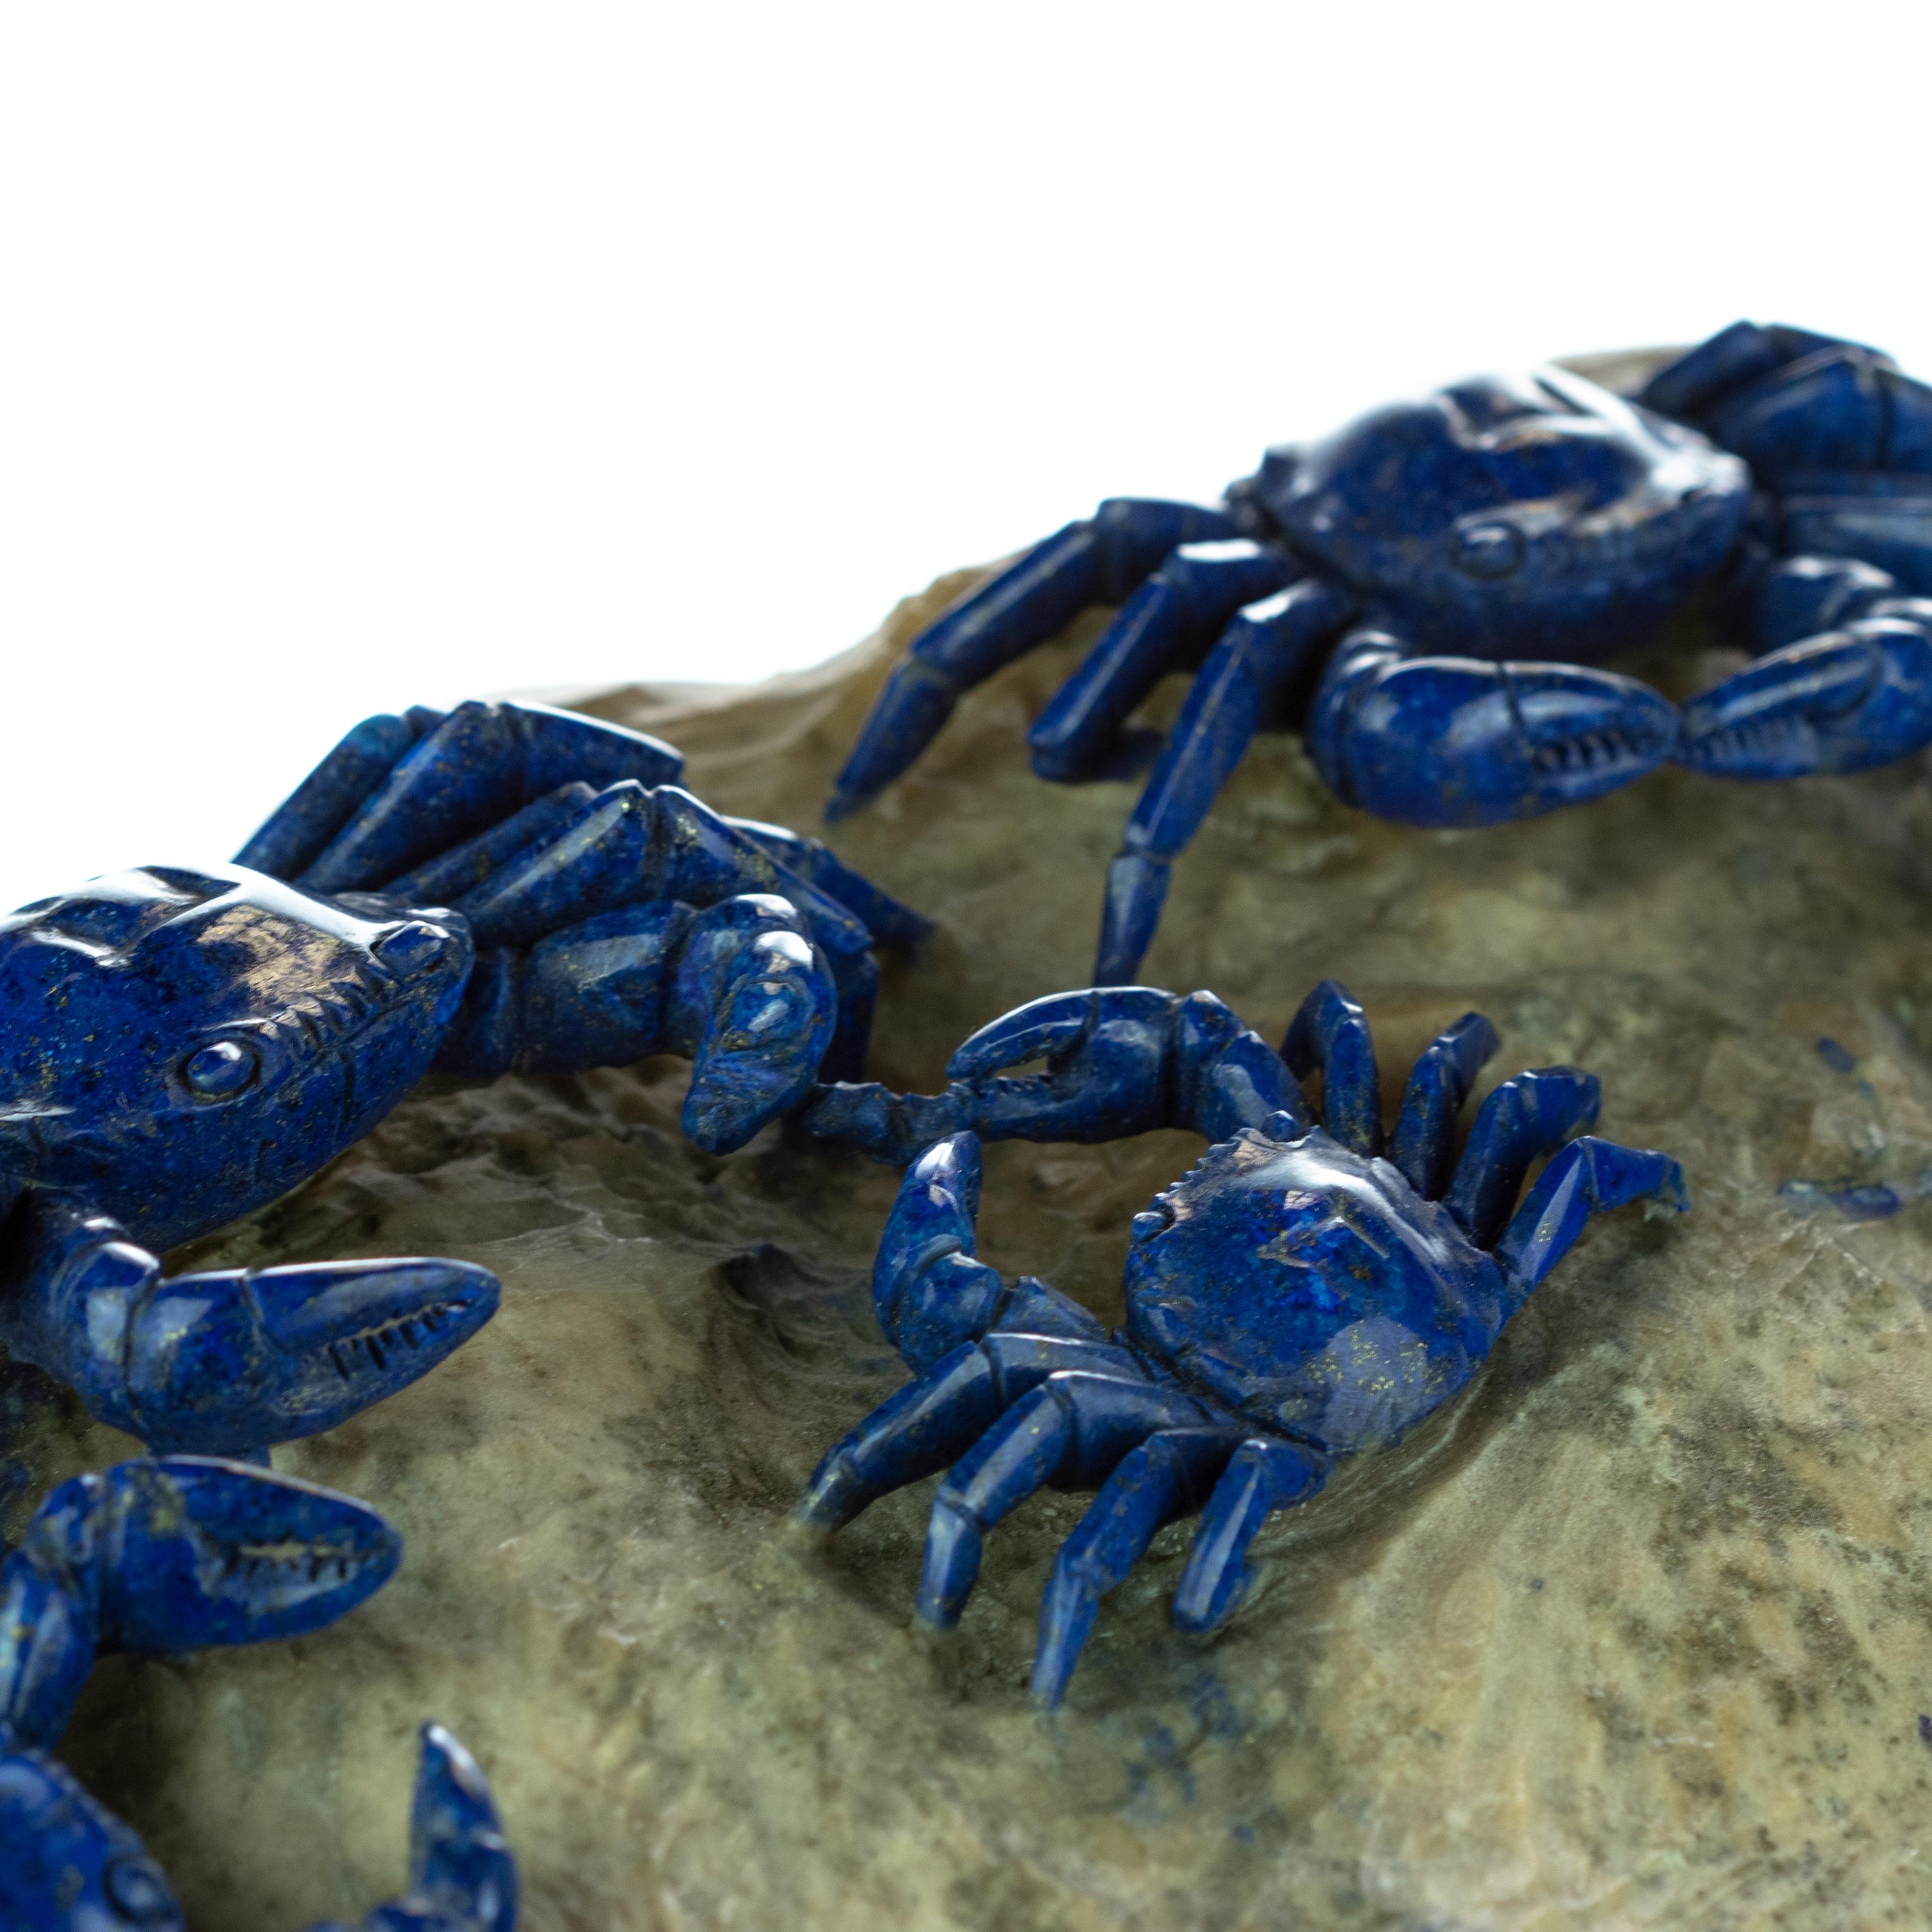 Hand-Carved Lapis Lazuli Blue Crab Carved Animal Artisanal Eastern Crabs Statue Sculpture